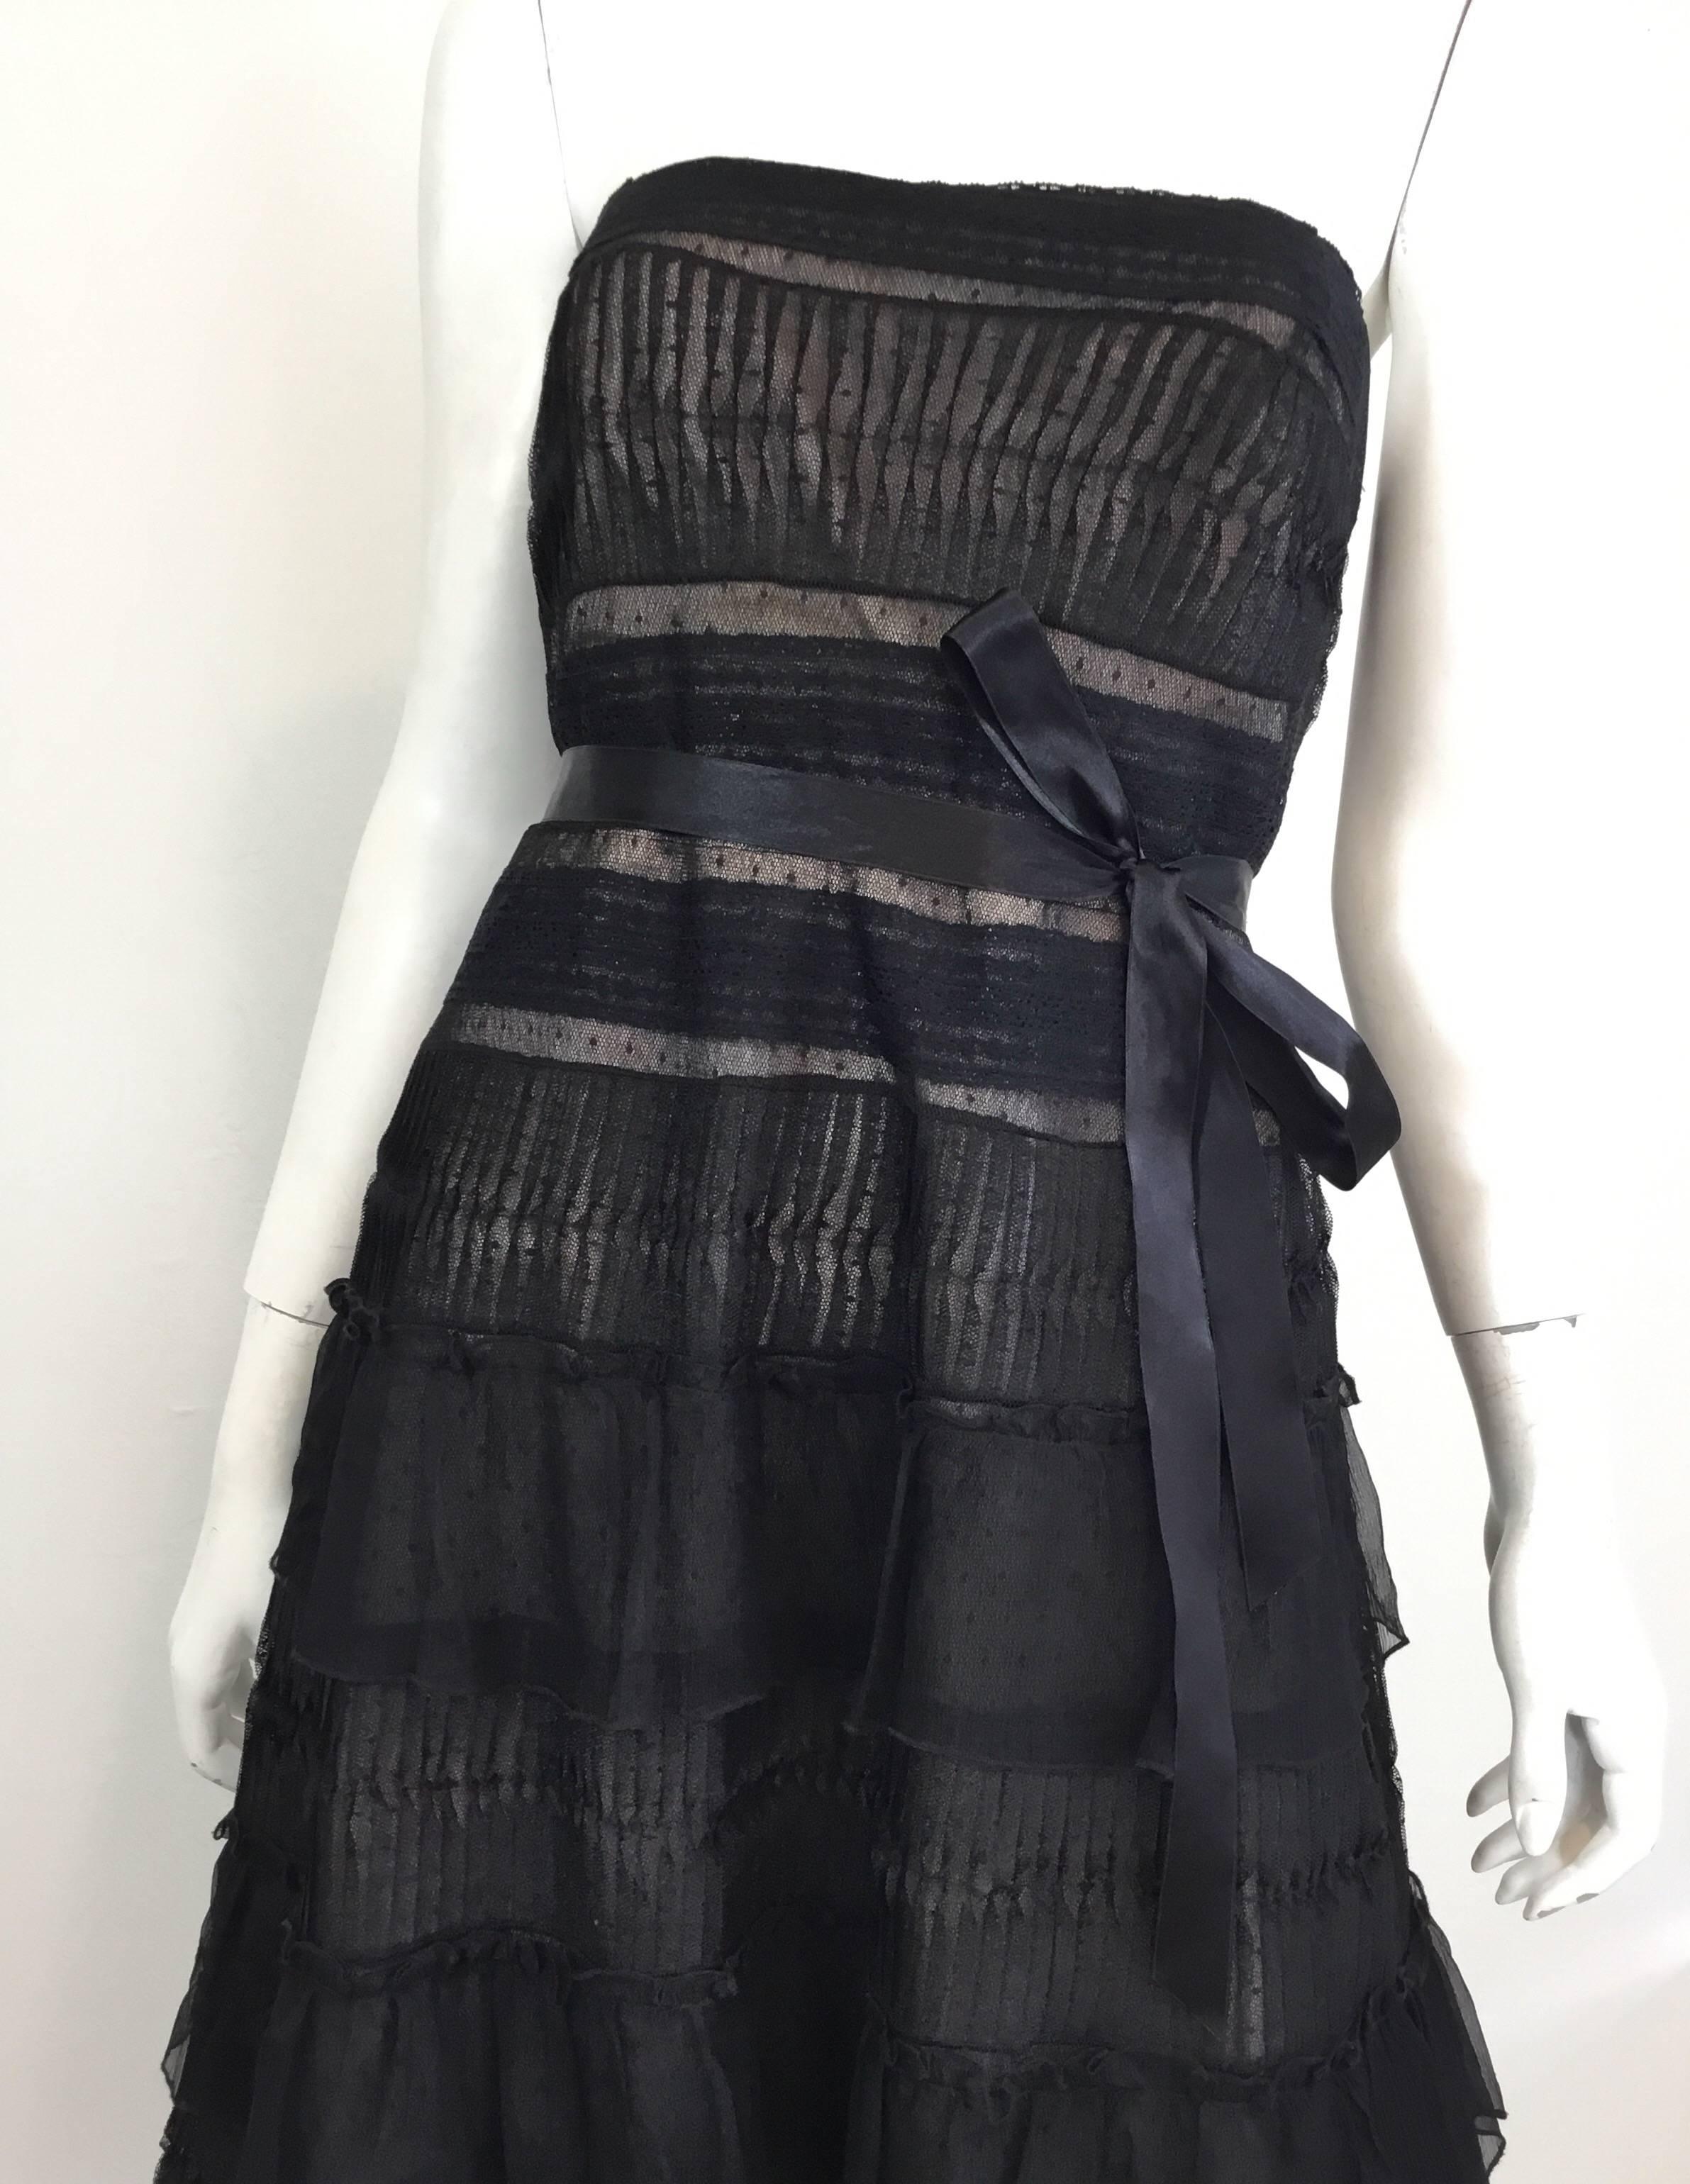 Carolina Herrera dress in black lace features a strapless style with a back zipper and ribbon waist tie fastening, silk sheer tiered detail, and an ostrich feather hem. Dress is fully lined. 

Measurements:
bust 34'', waist 30'', hips 40'', length